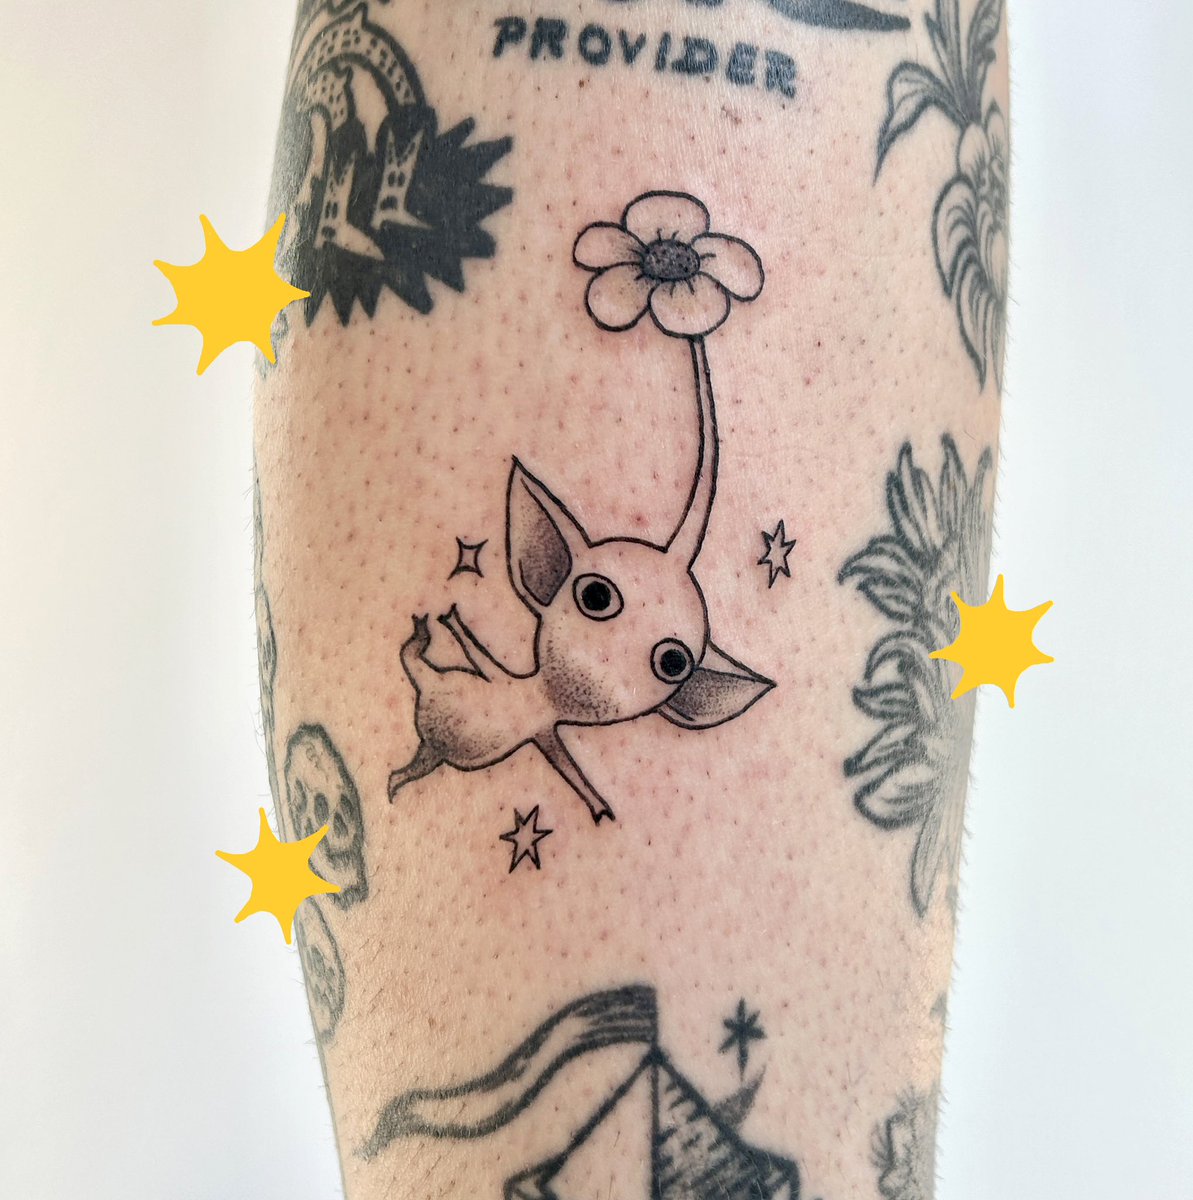 「Did a yellow pikmin tattoo trade with my」|Jamie Greenのイラスト